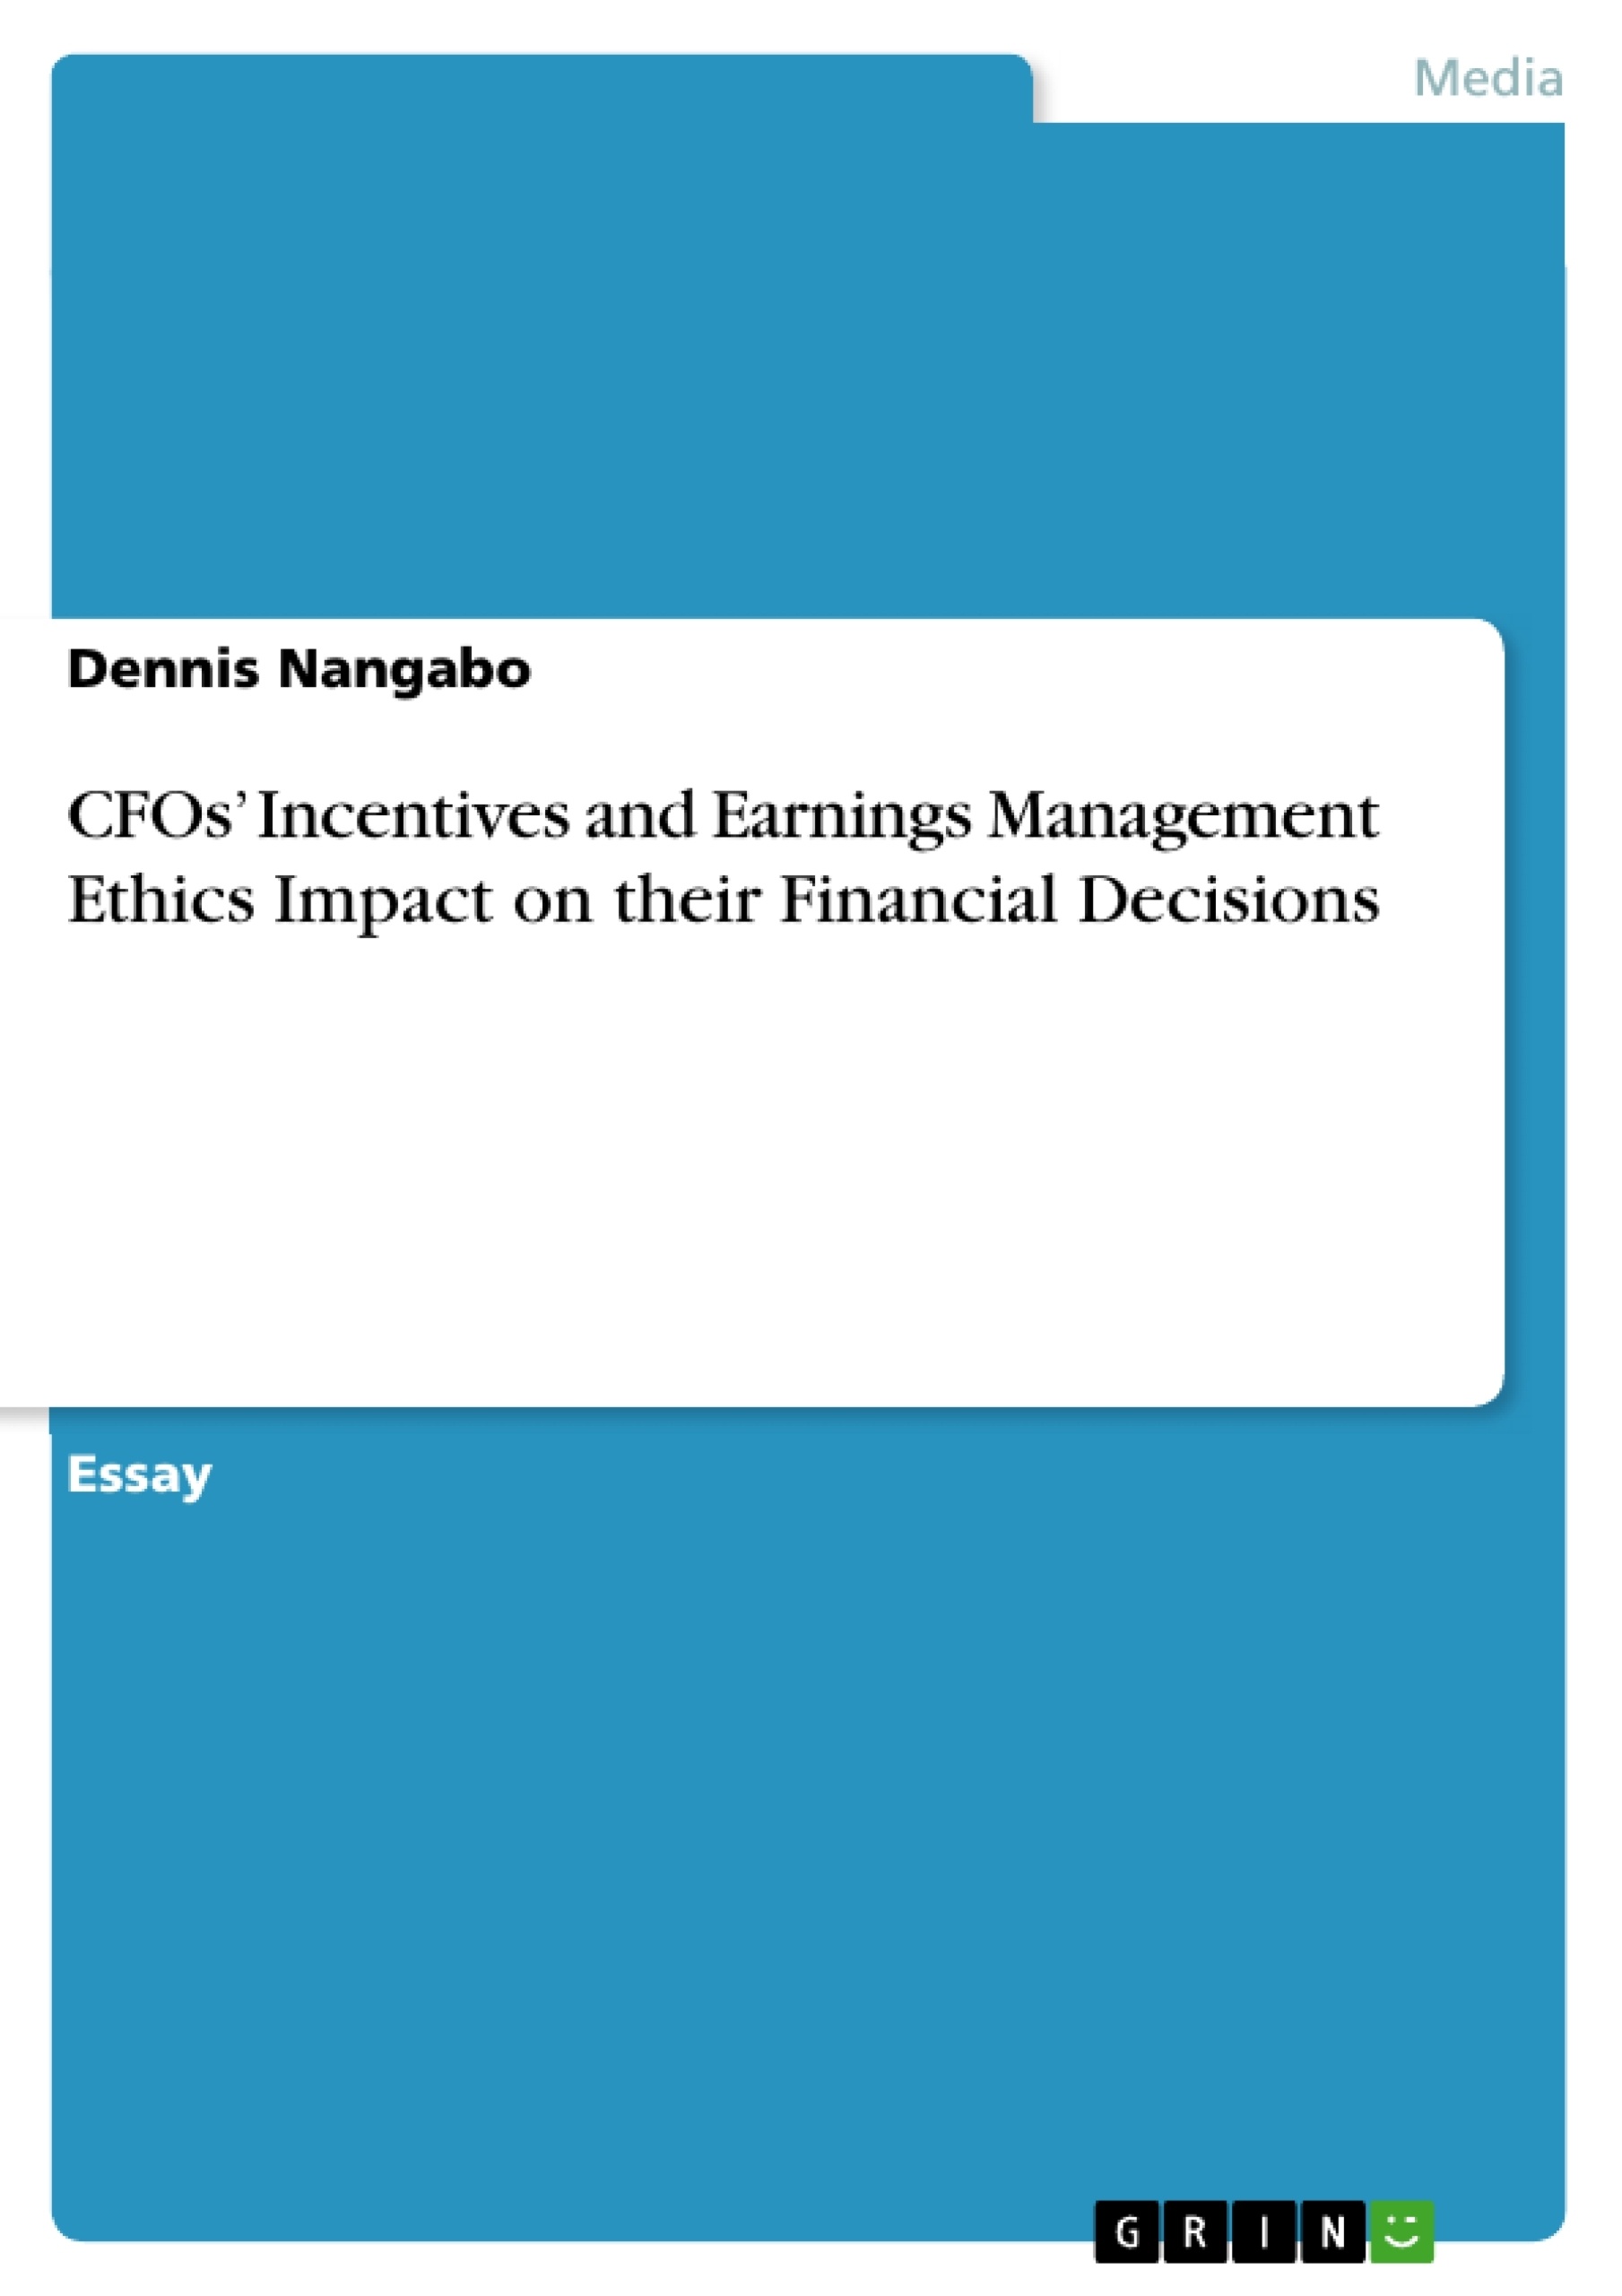 Title: CFOs’ Incentives and Earnings Management Ethics Impact on their Financial Decisions